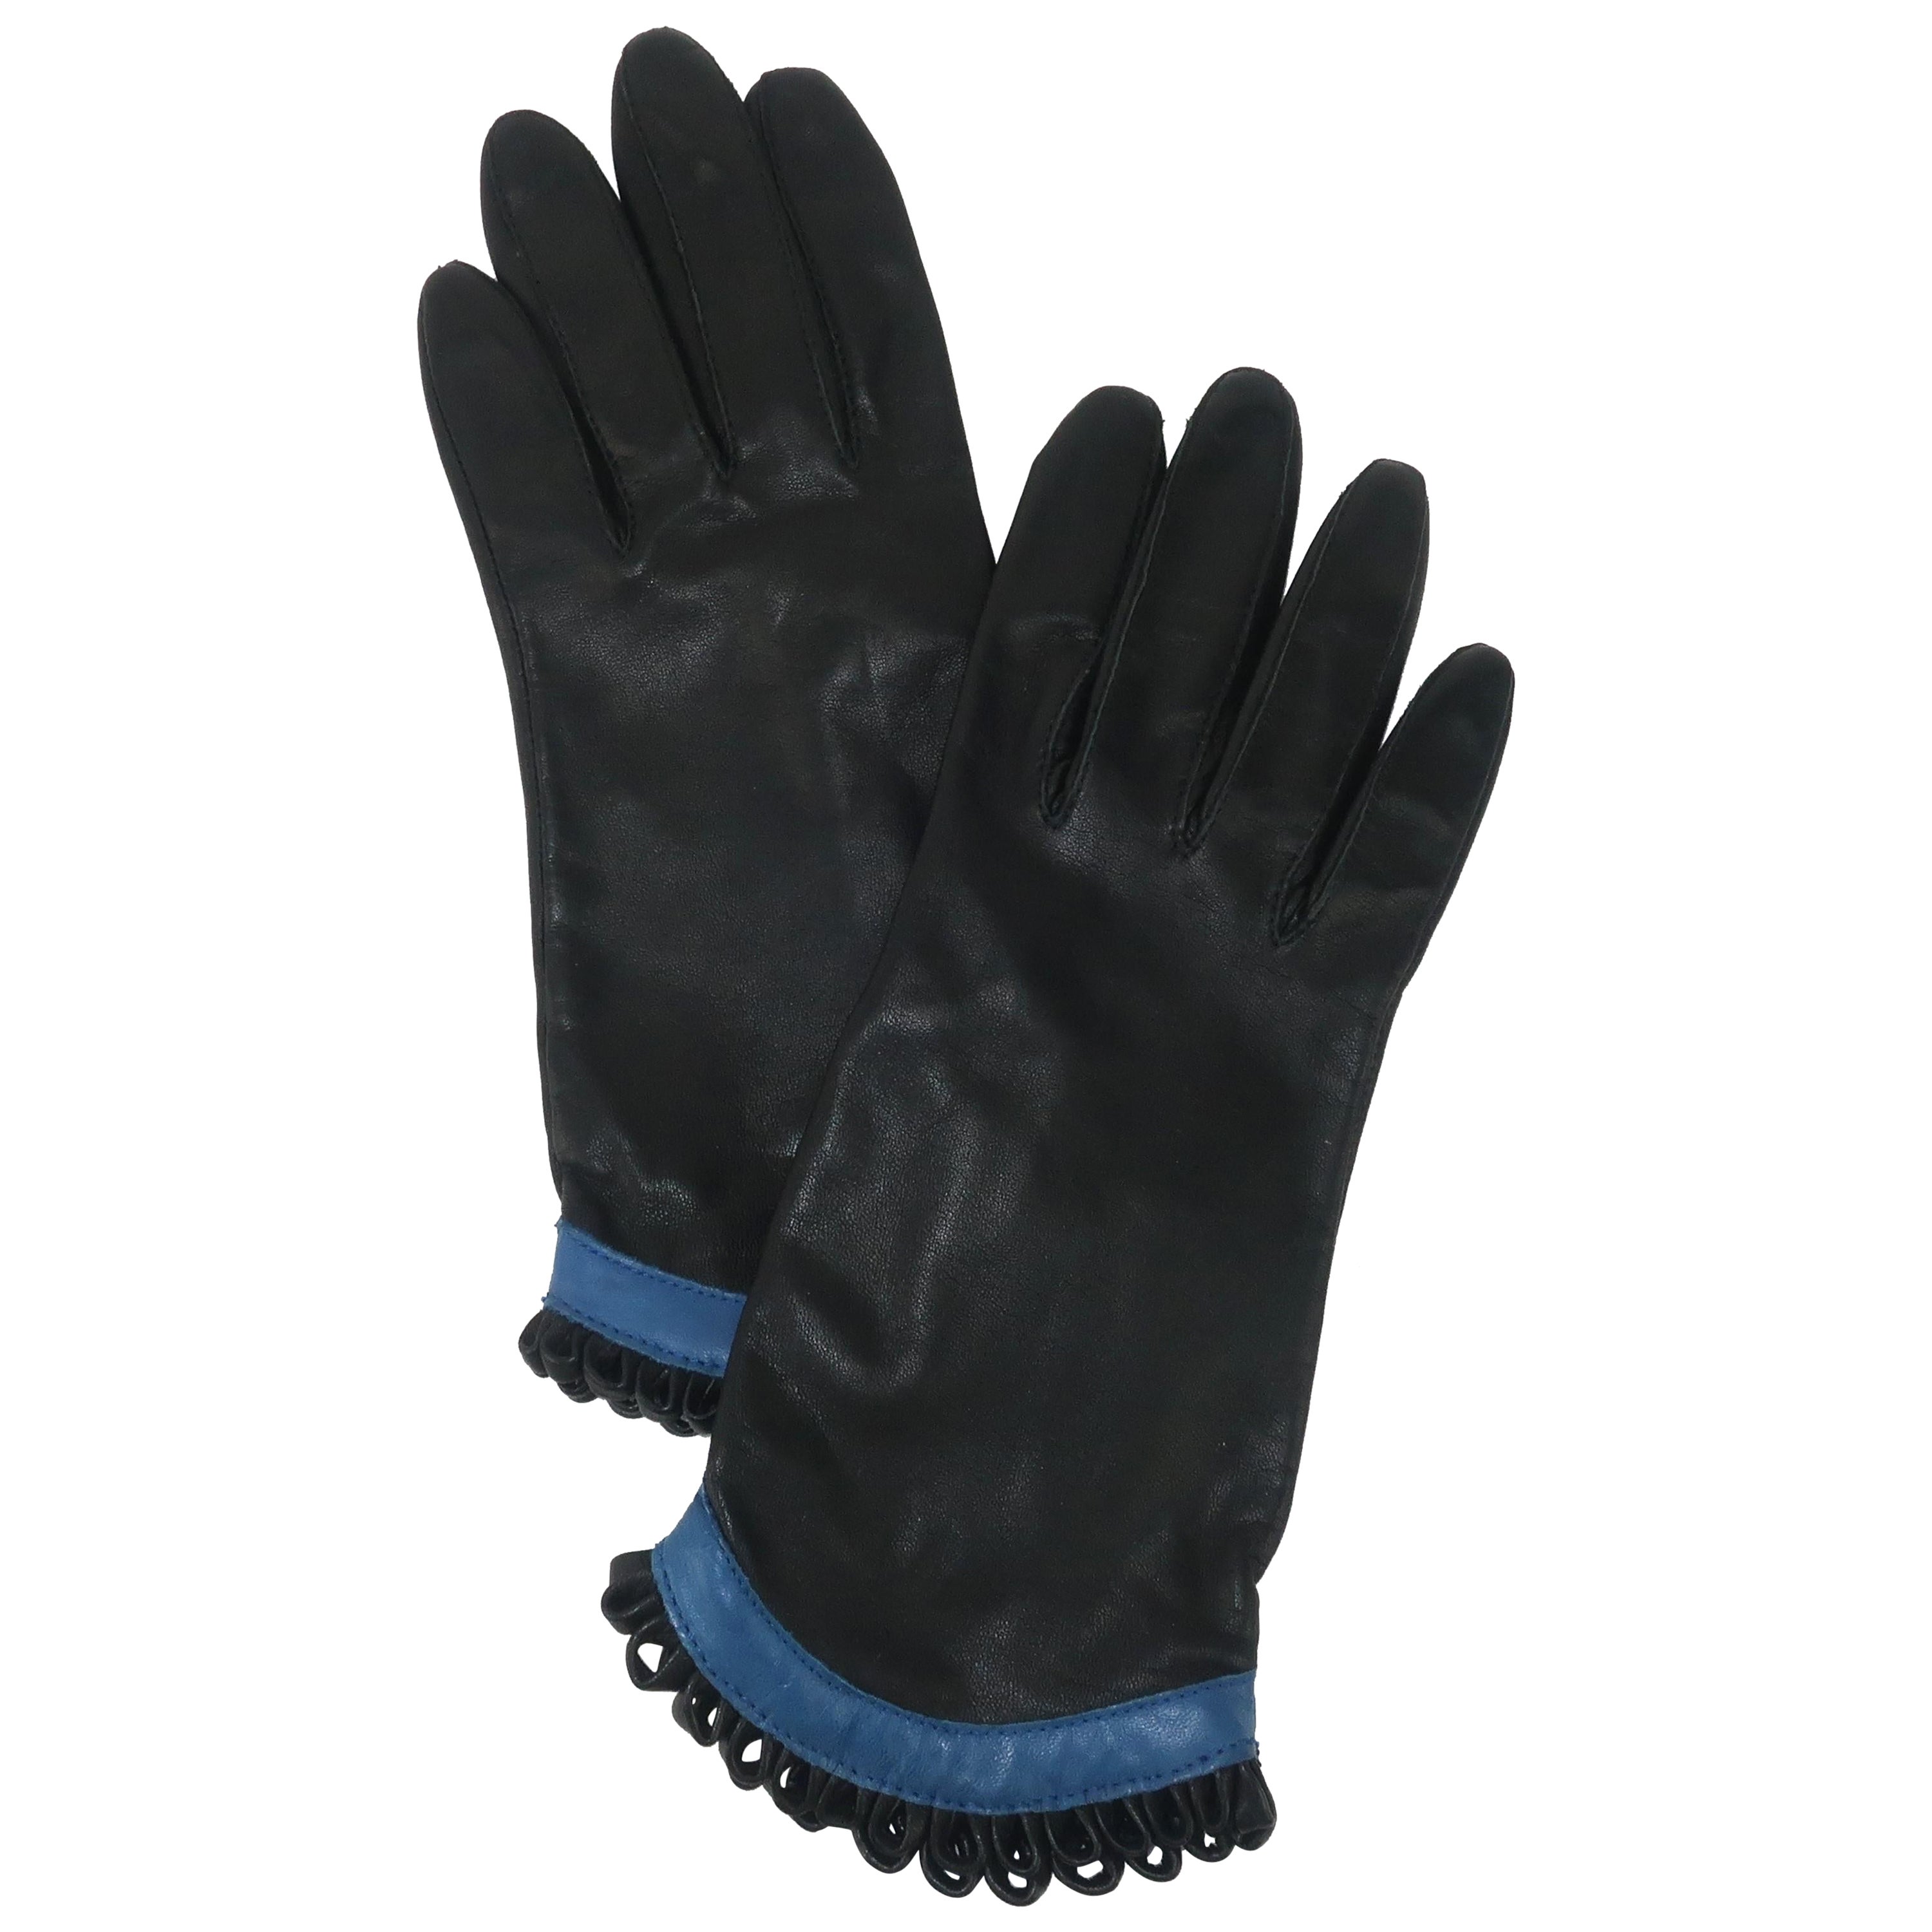 Black & Blue Leather Gloves With Looped Fringe Cuffs